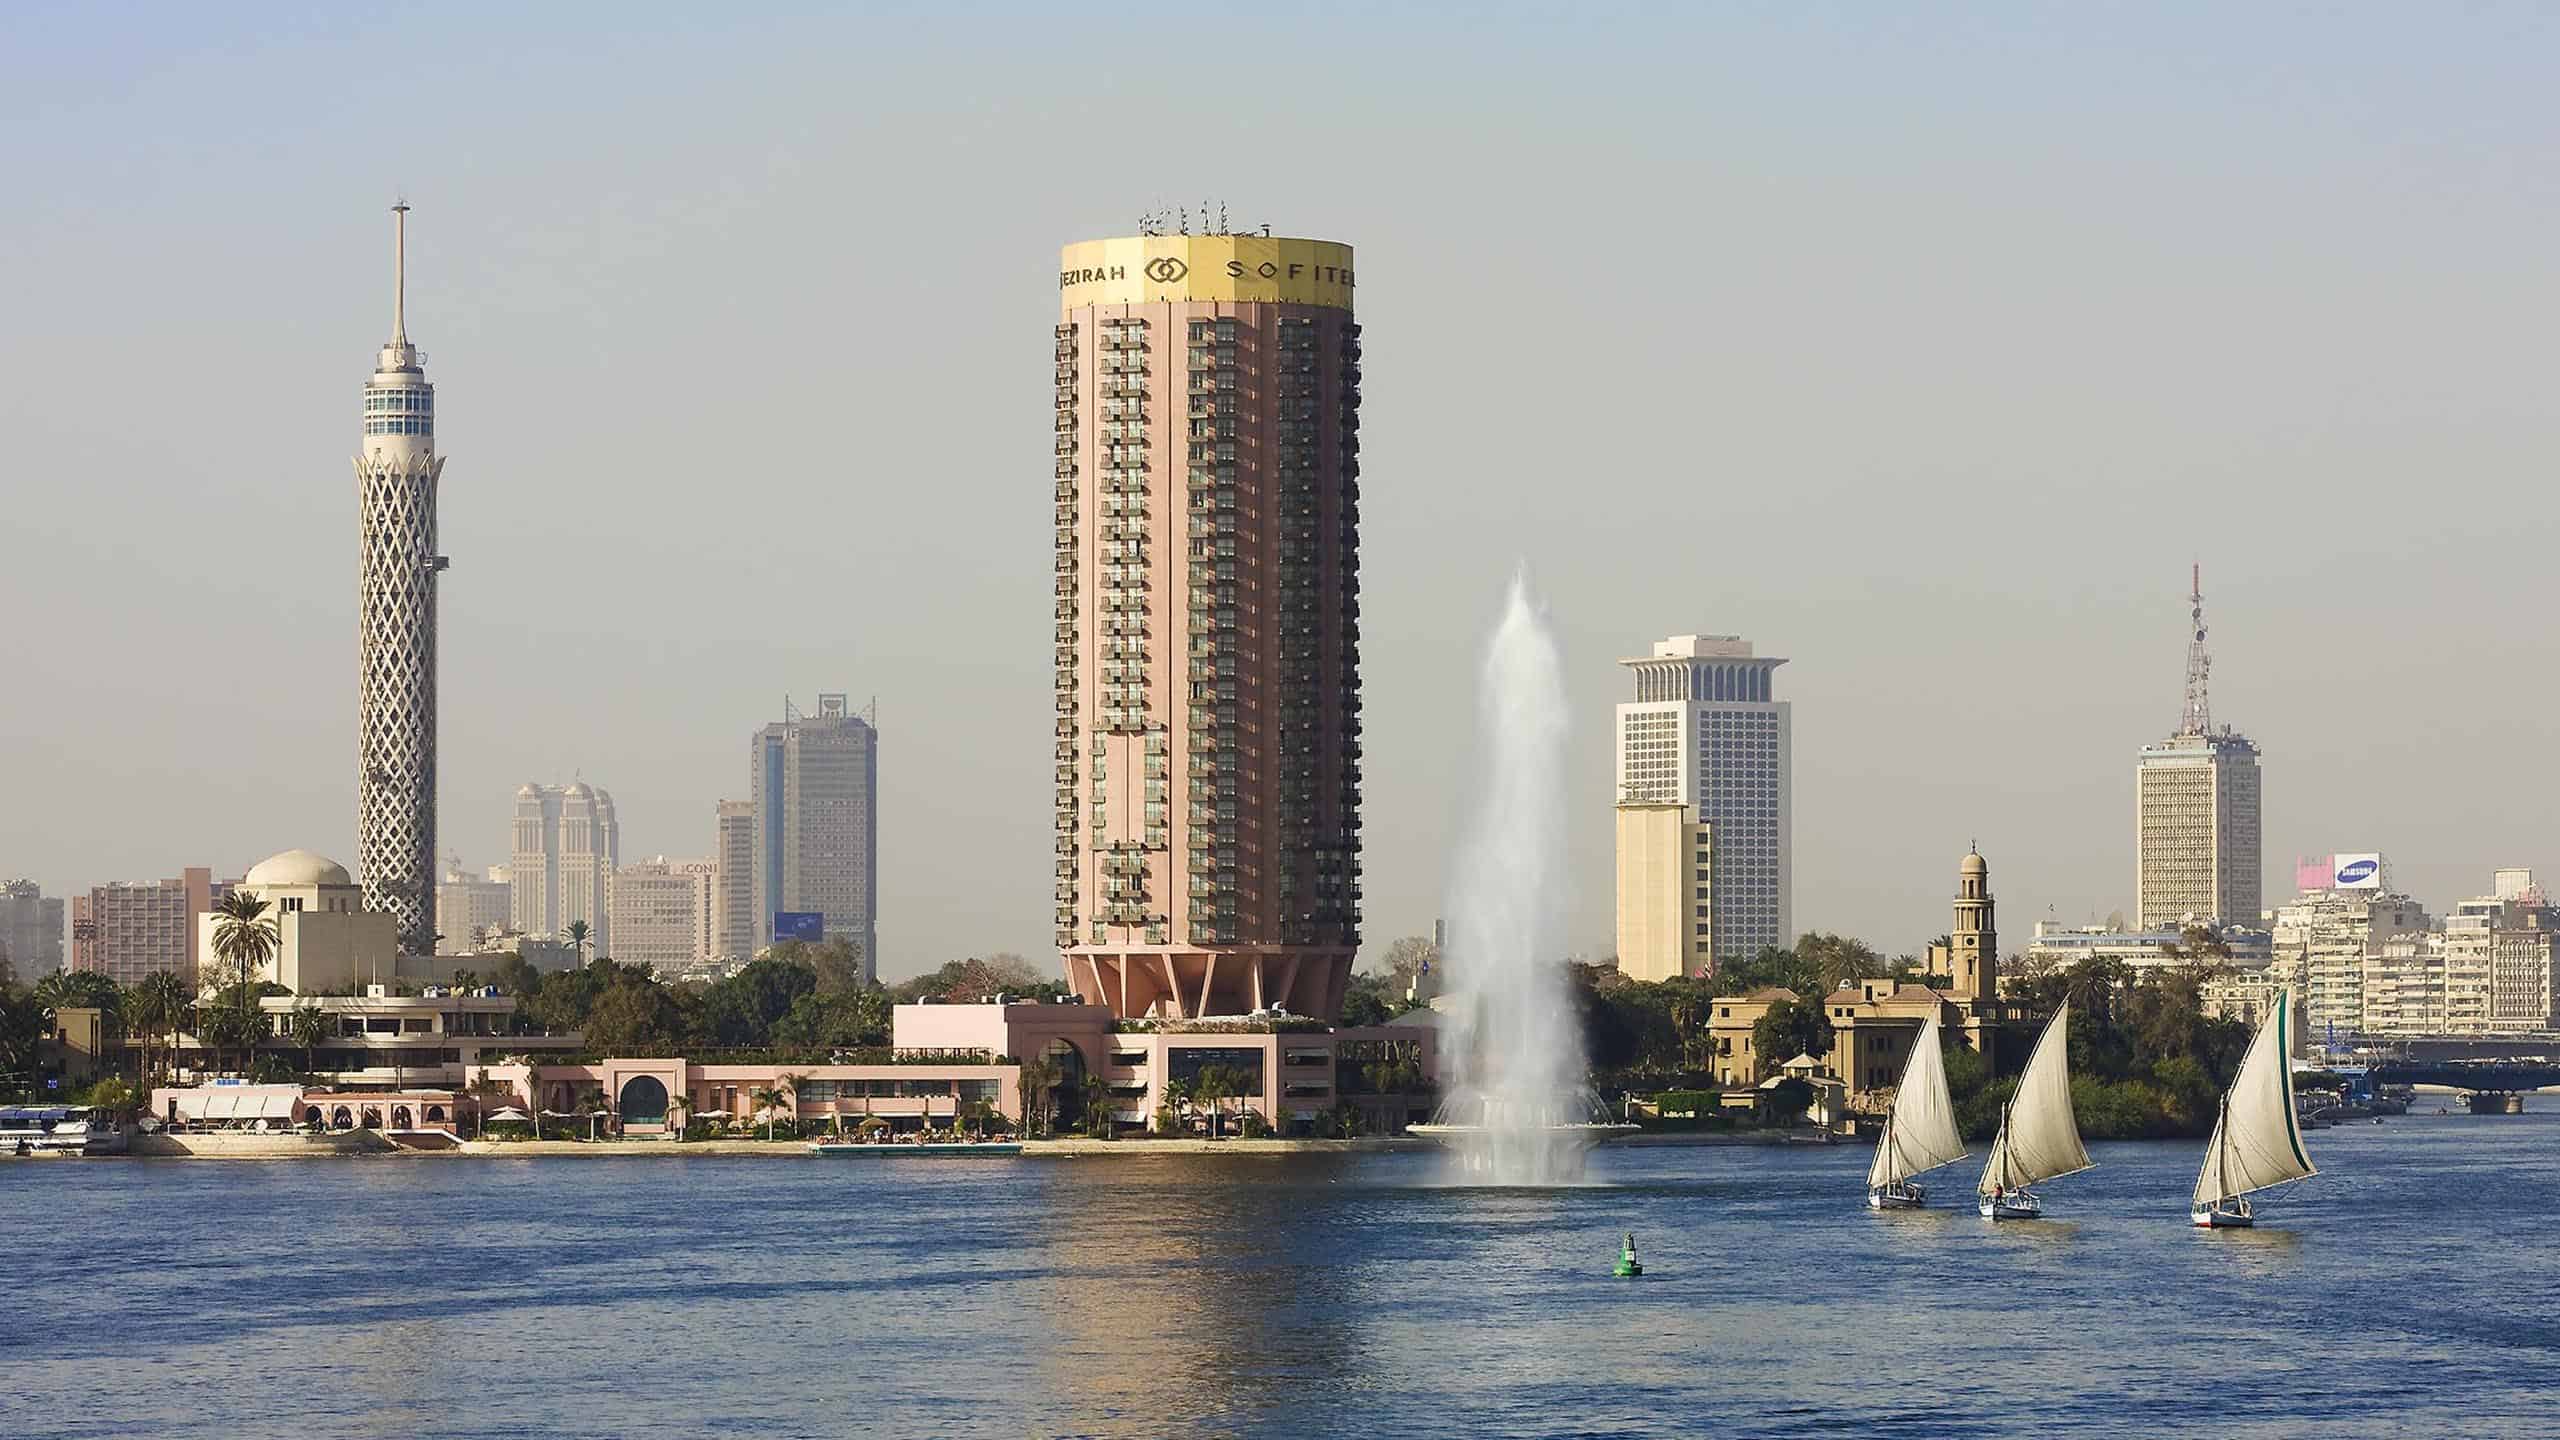 Sofitel El Gezirah one of most famous hotels in Cairo - Photo Credit Sofitel